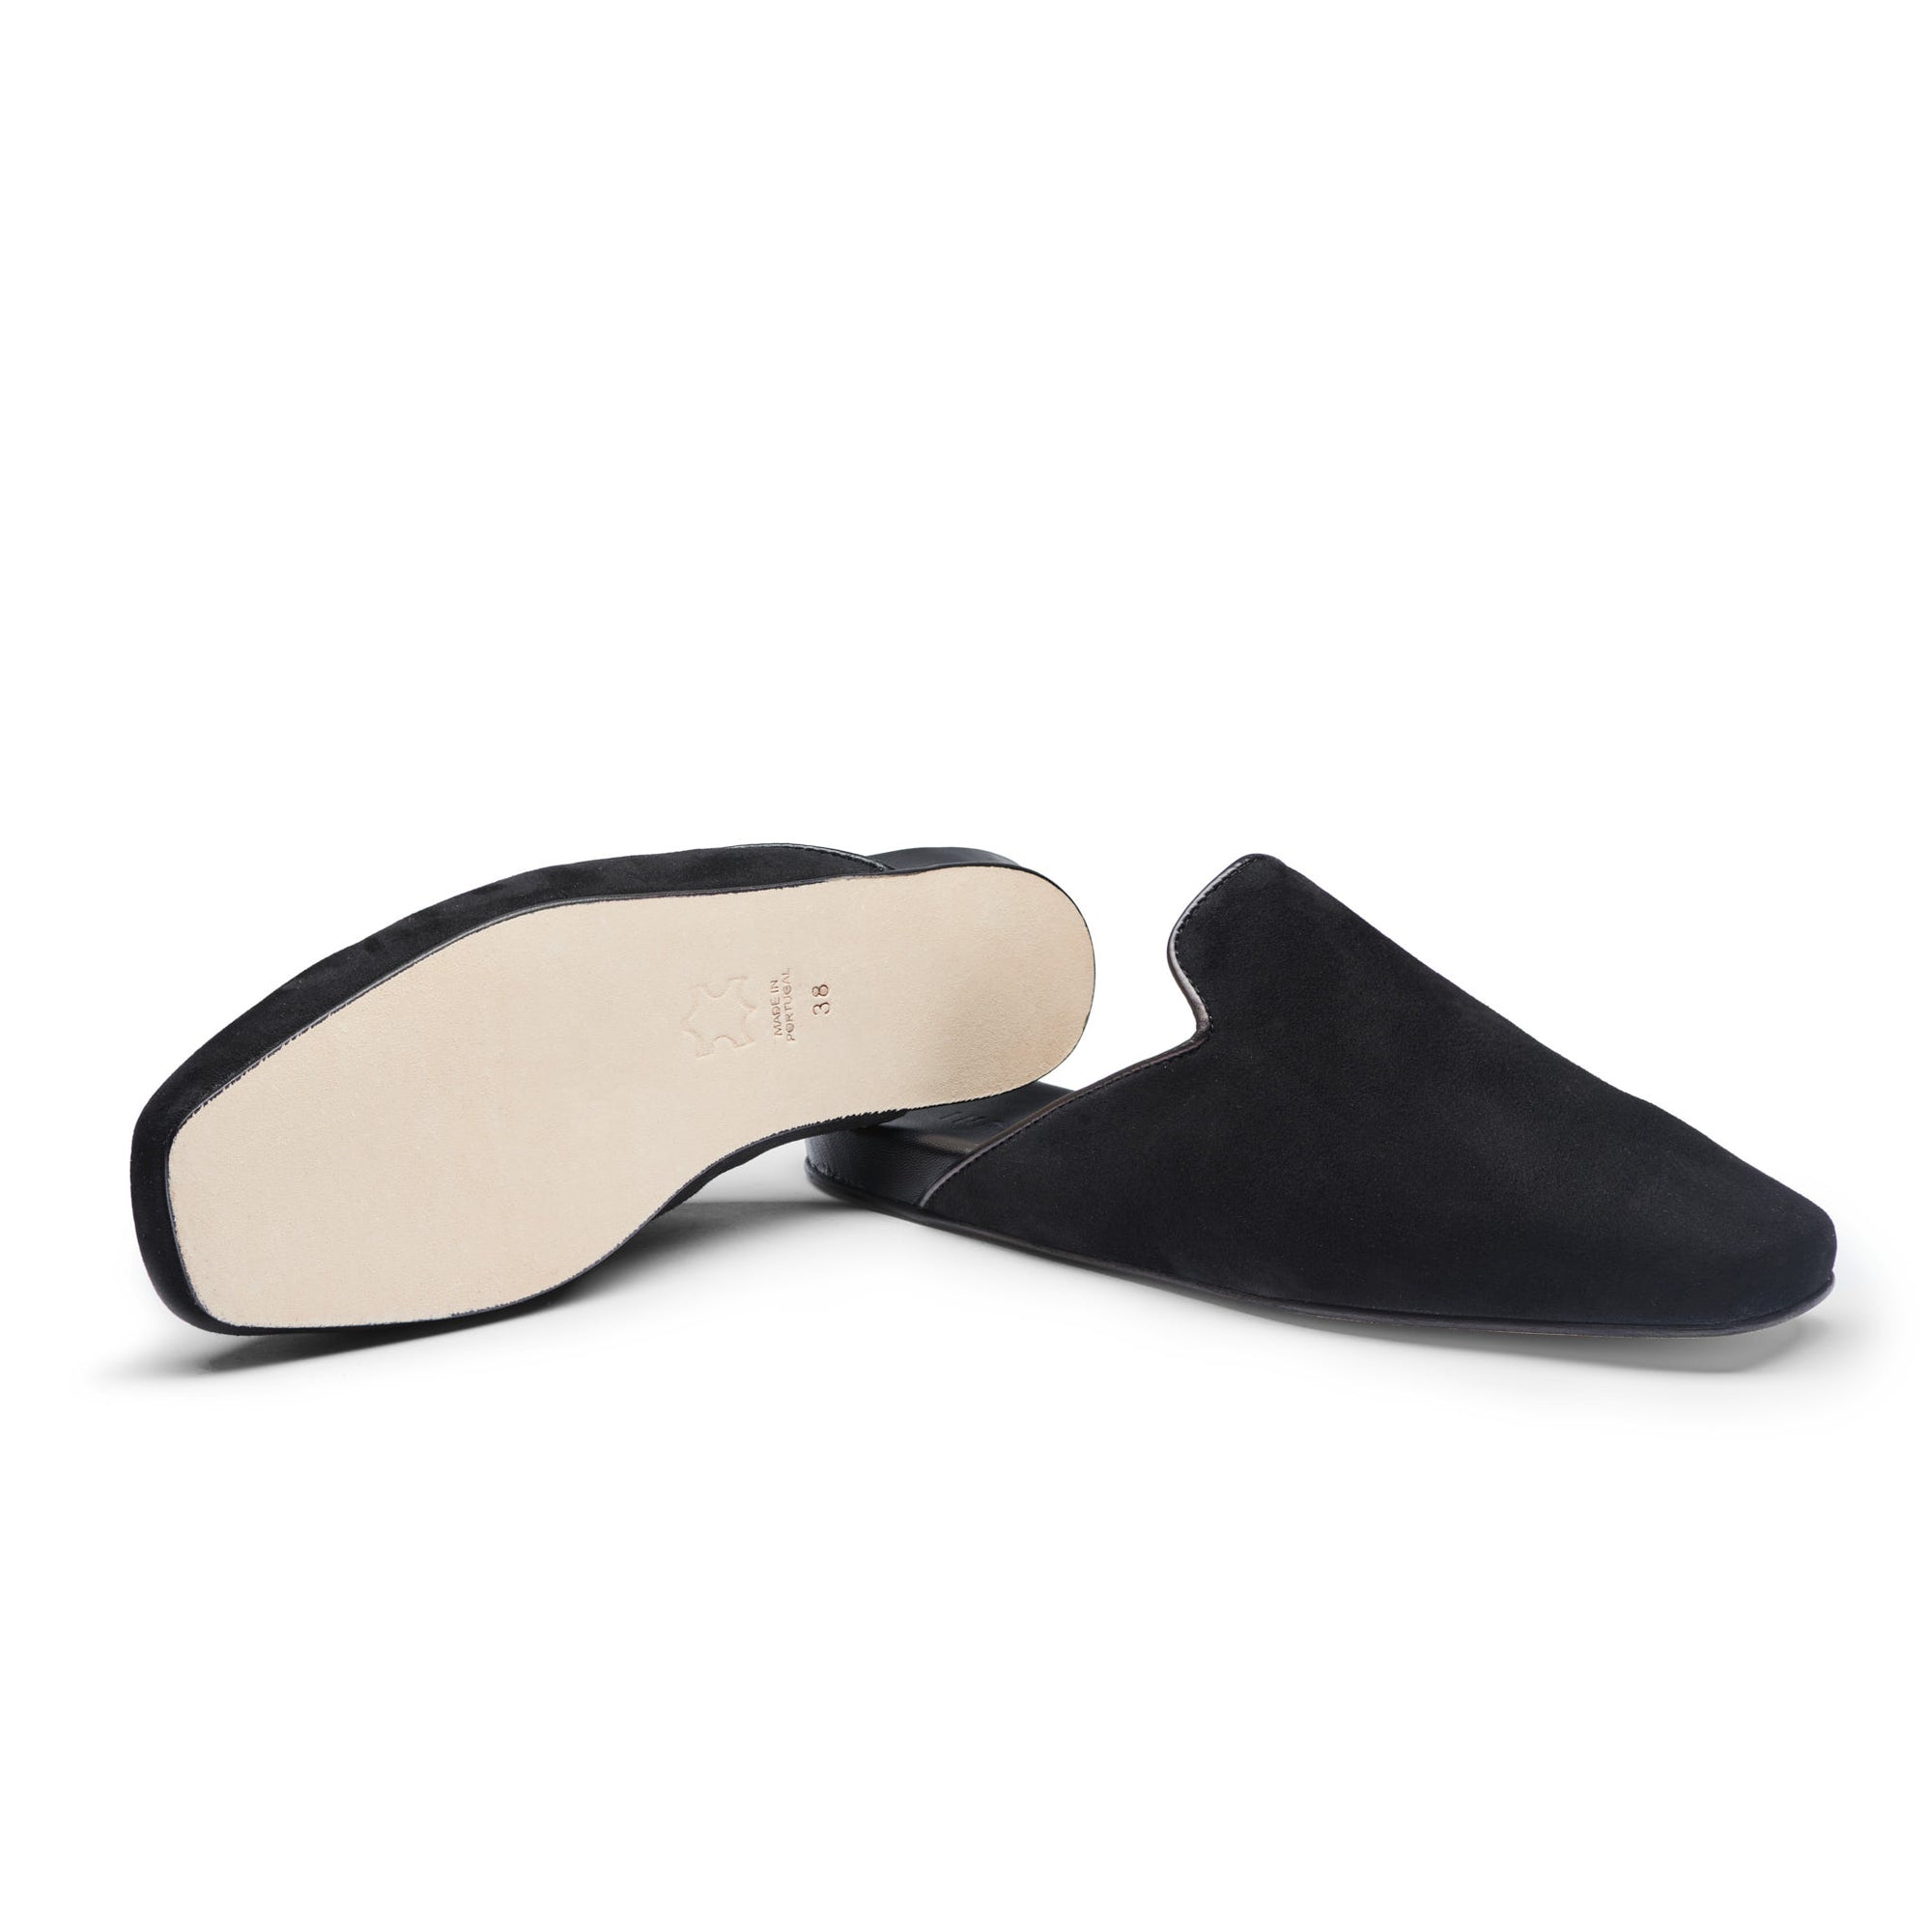 Inabo Women's Hilma Slipper in black suede showing the leather outer sole